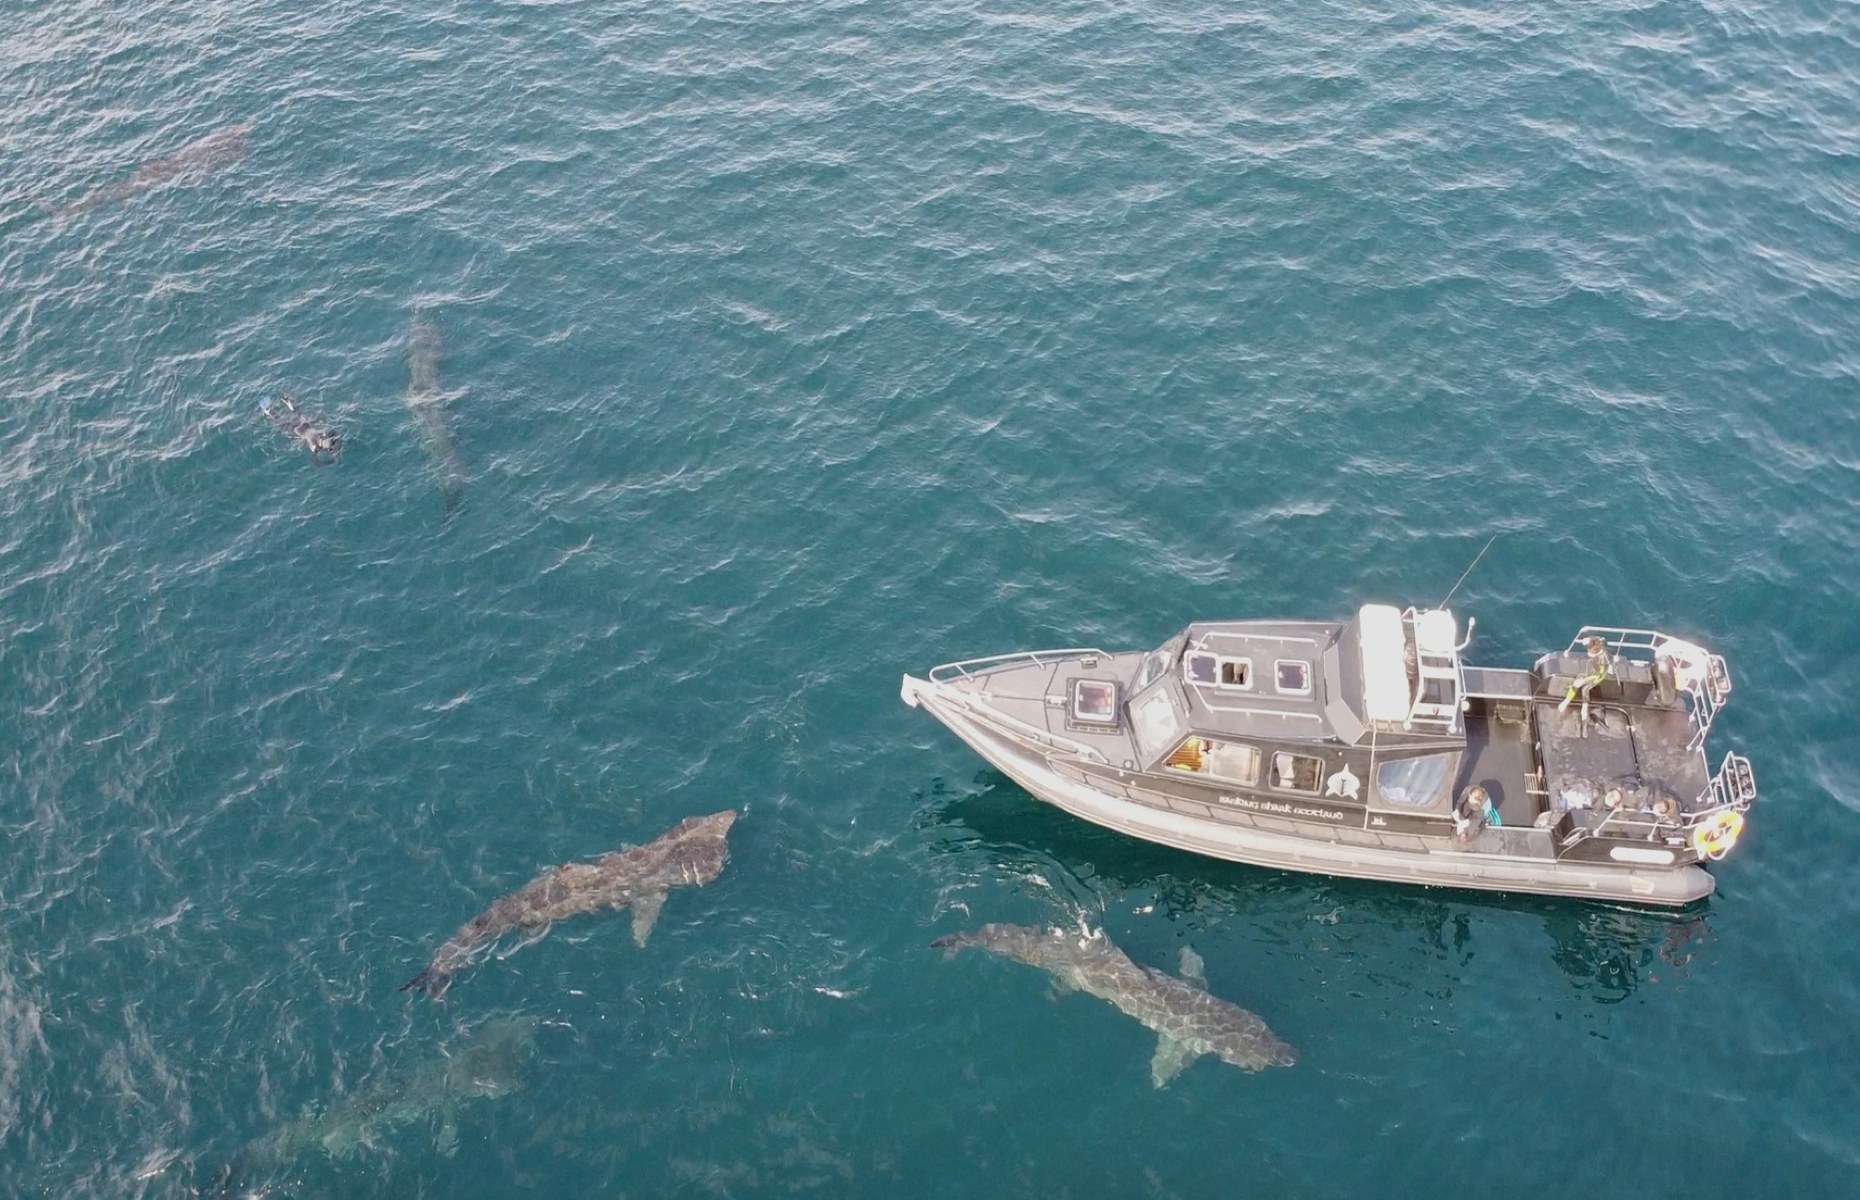 Sharks swimming in front of a boat (Image: Basking Shark Scotland/Facebook)